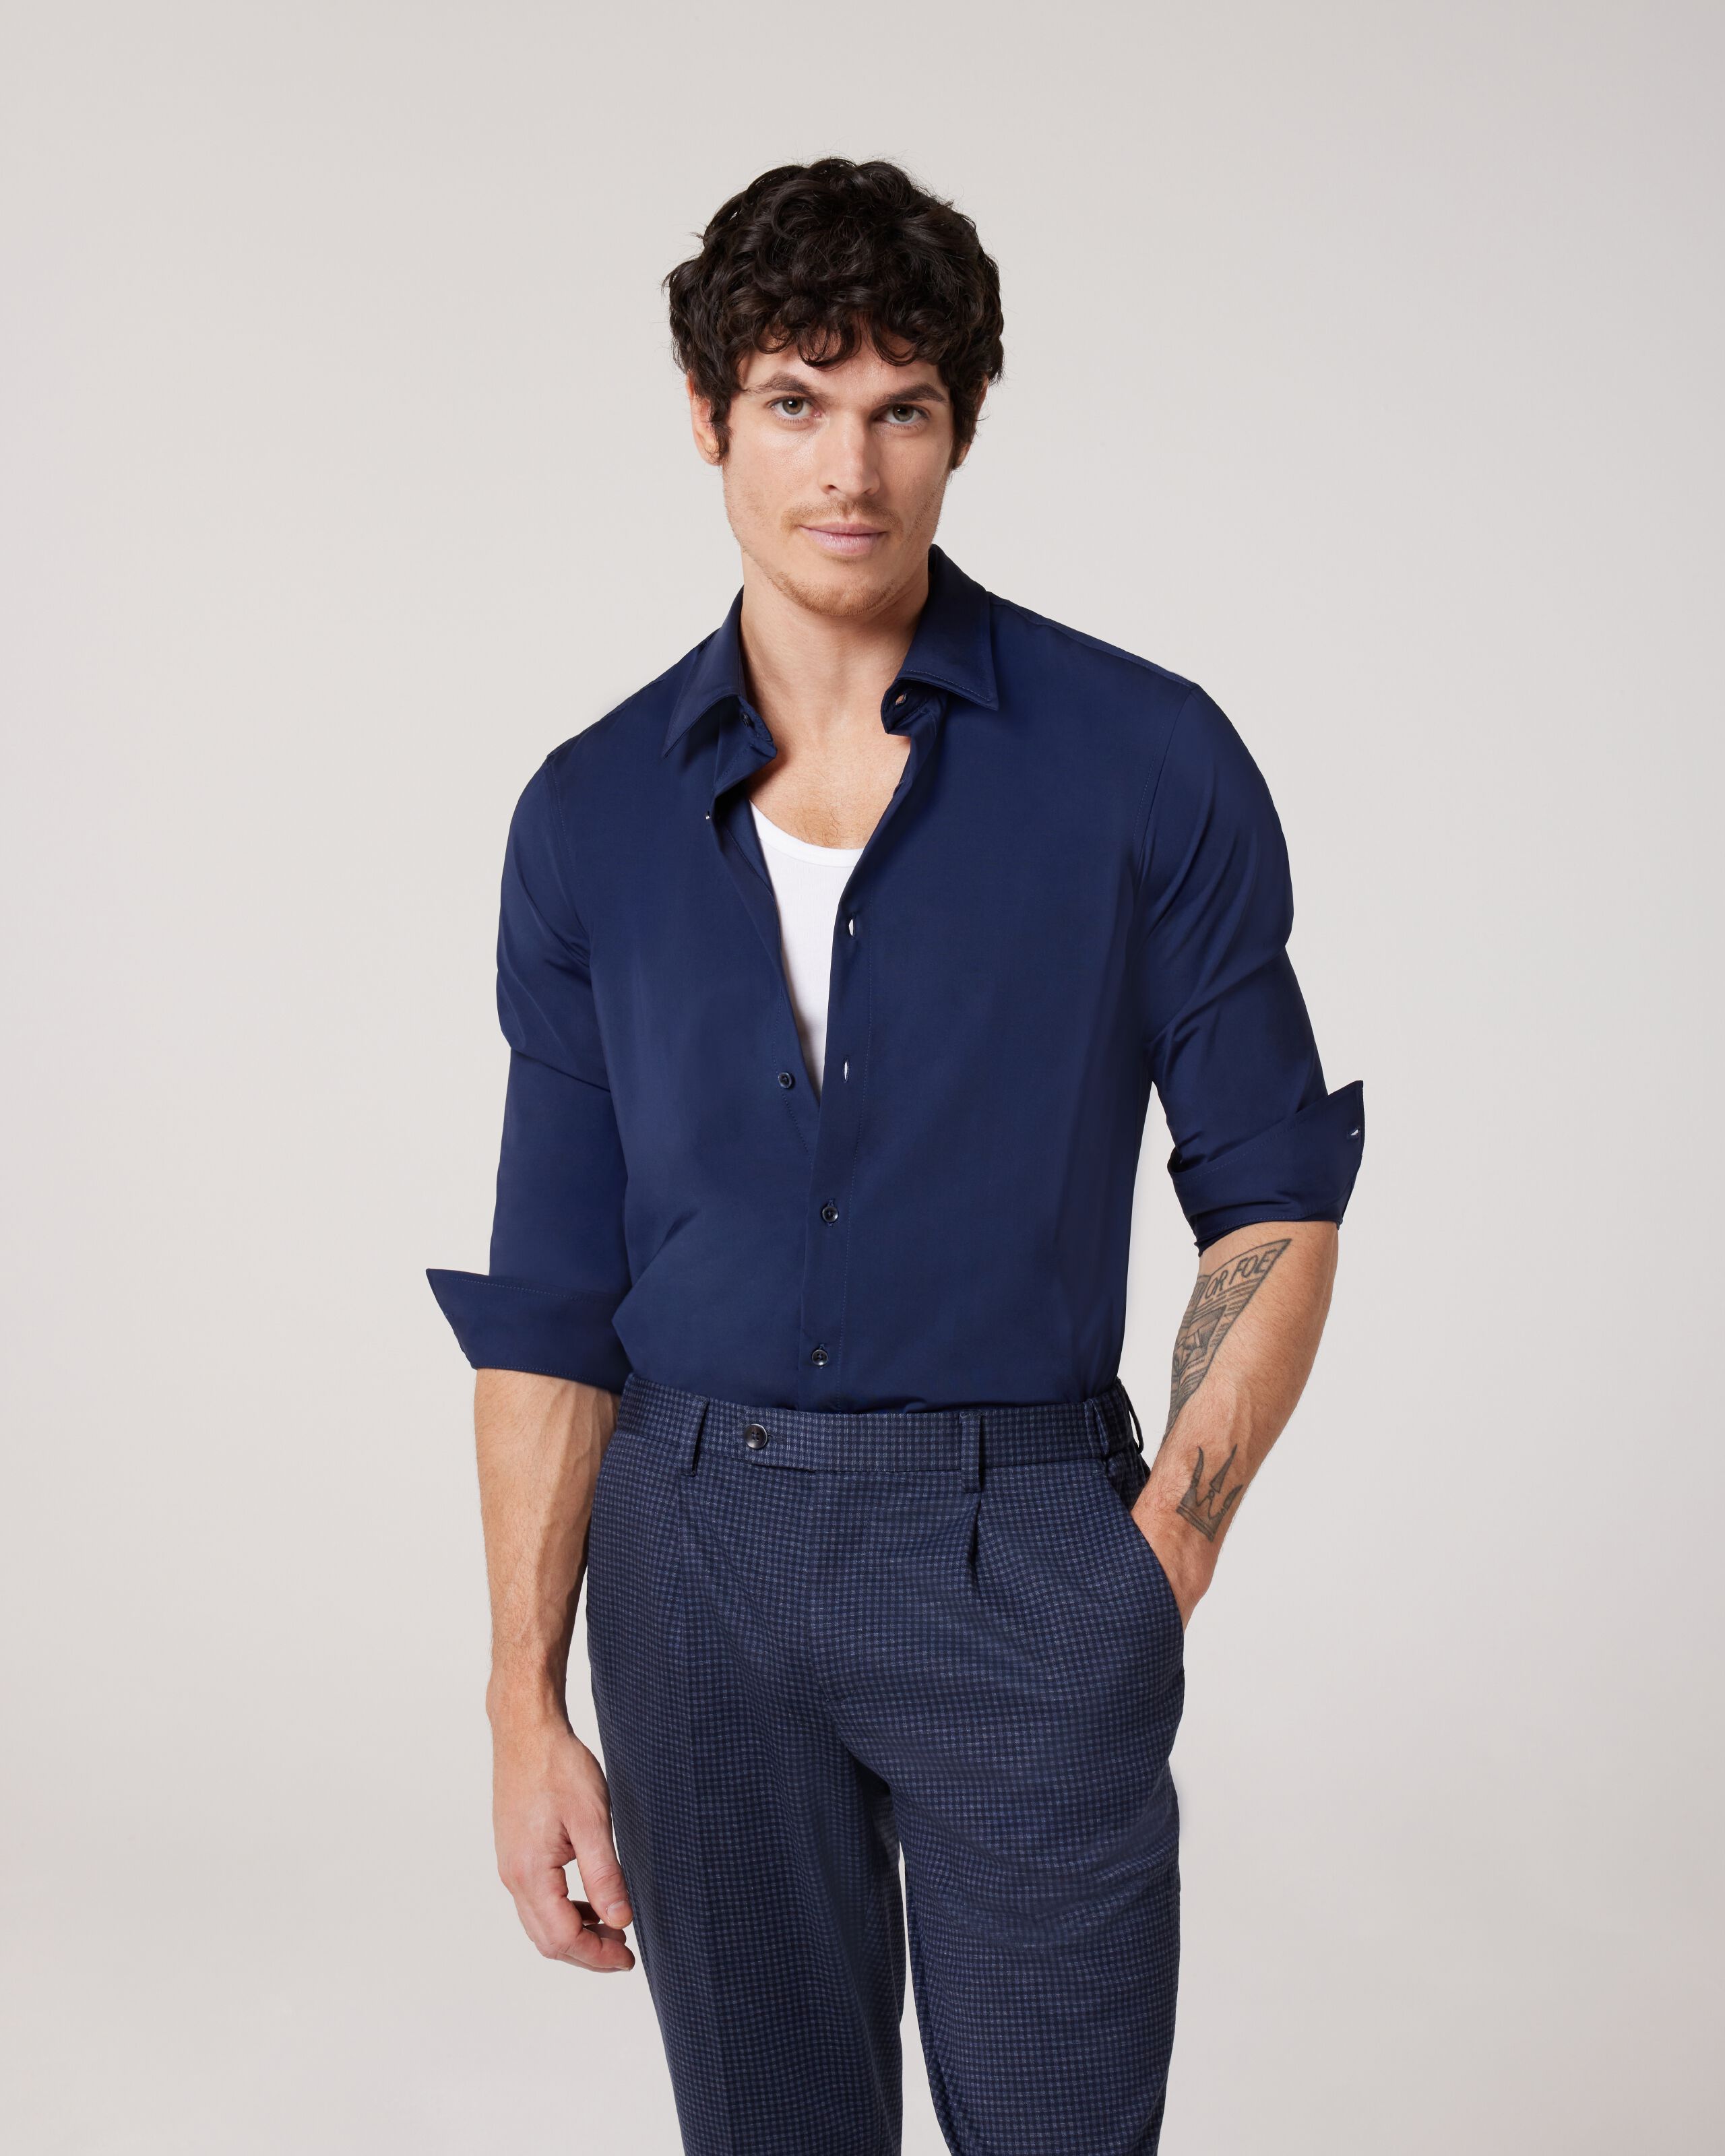 Trendy Navy Blue Shirt And Black Pants For Men, 58% OFF